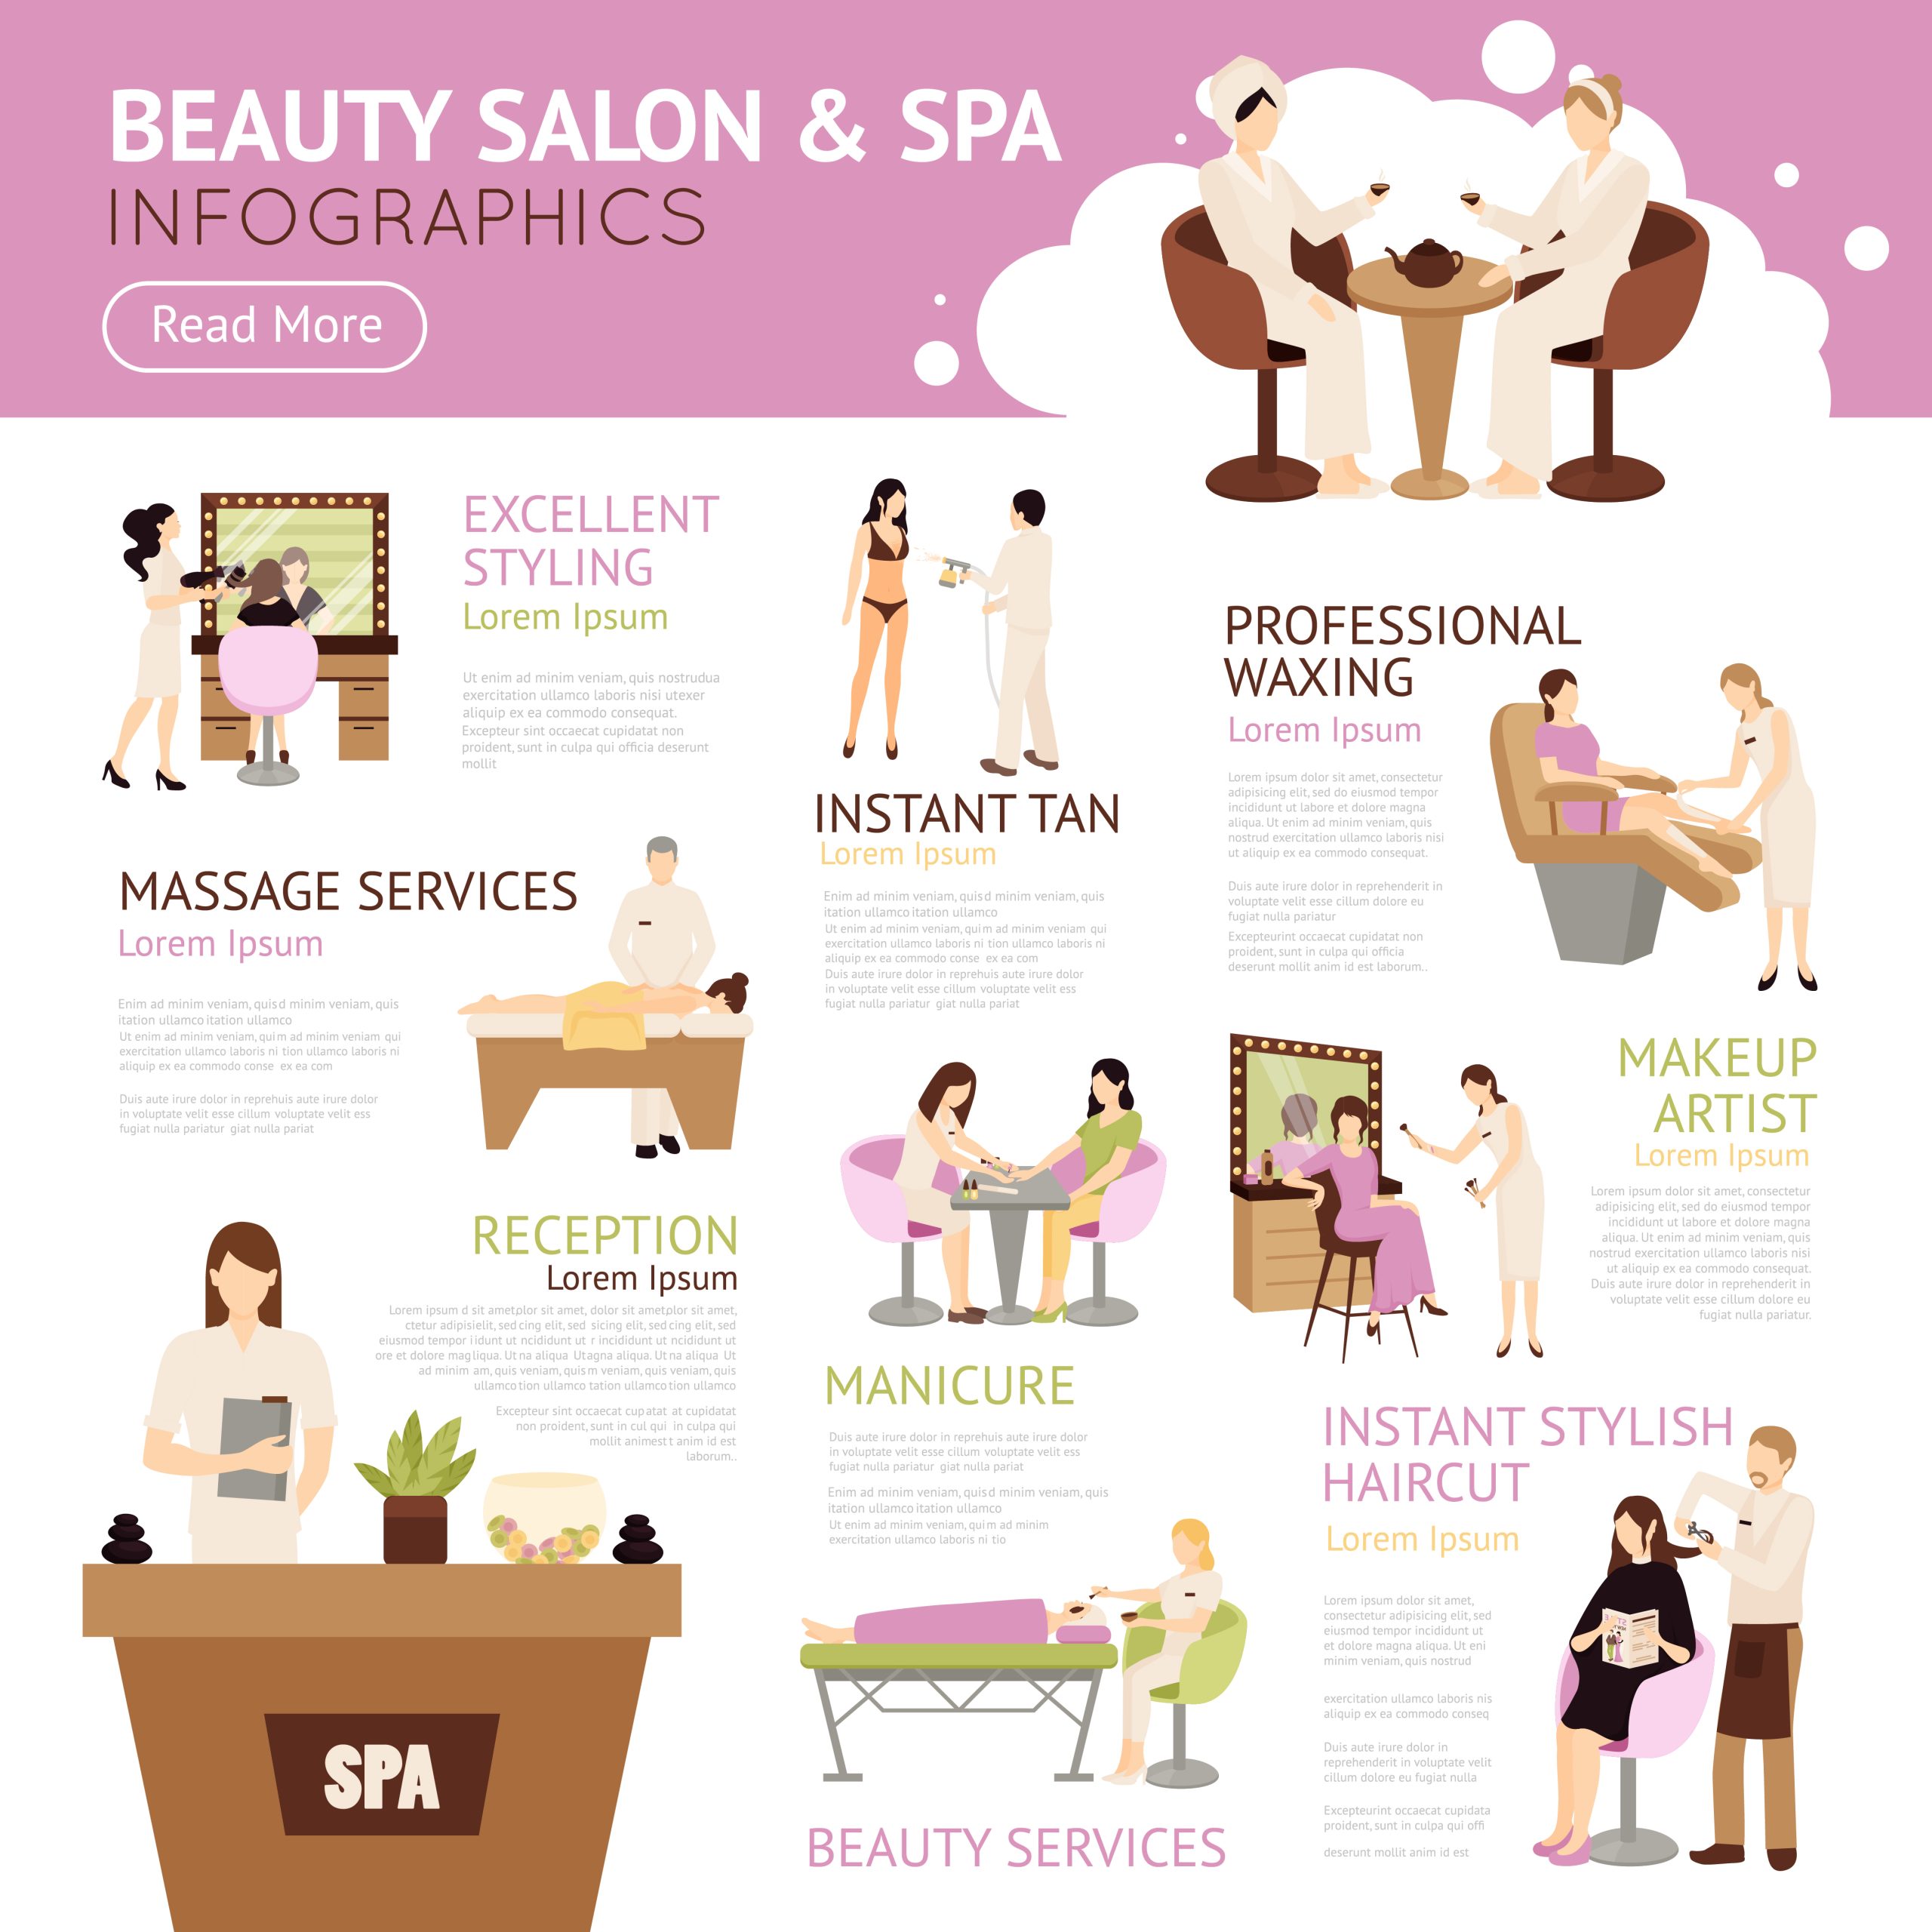 Beauty course near me infographic image 1